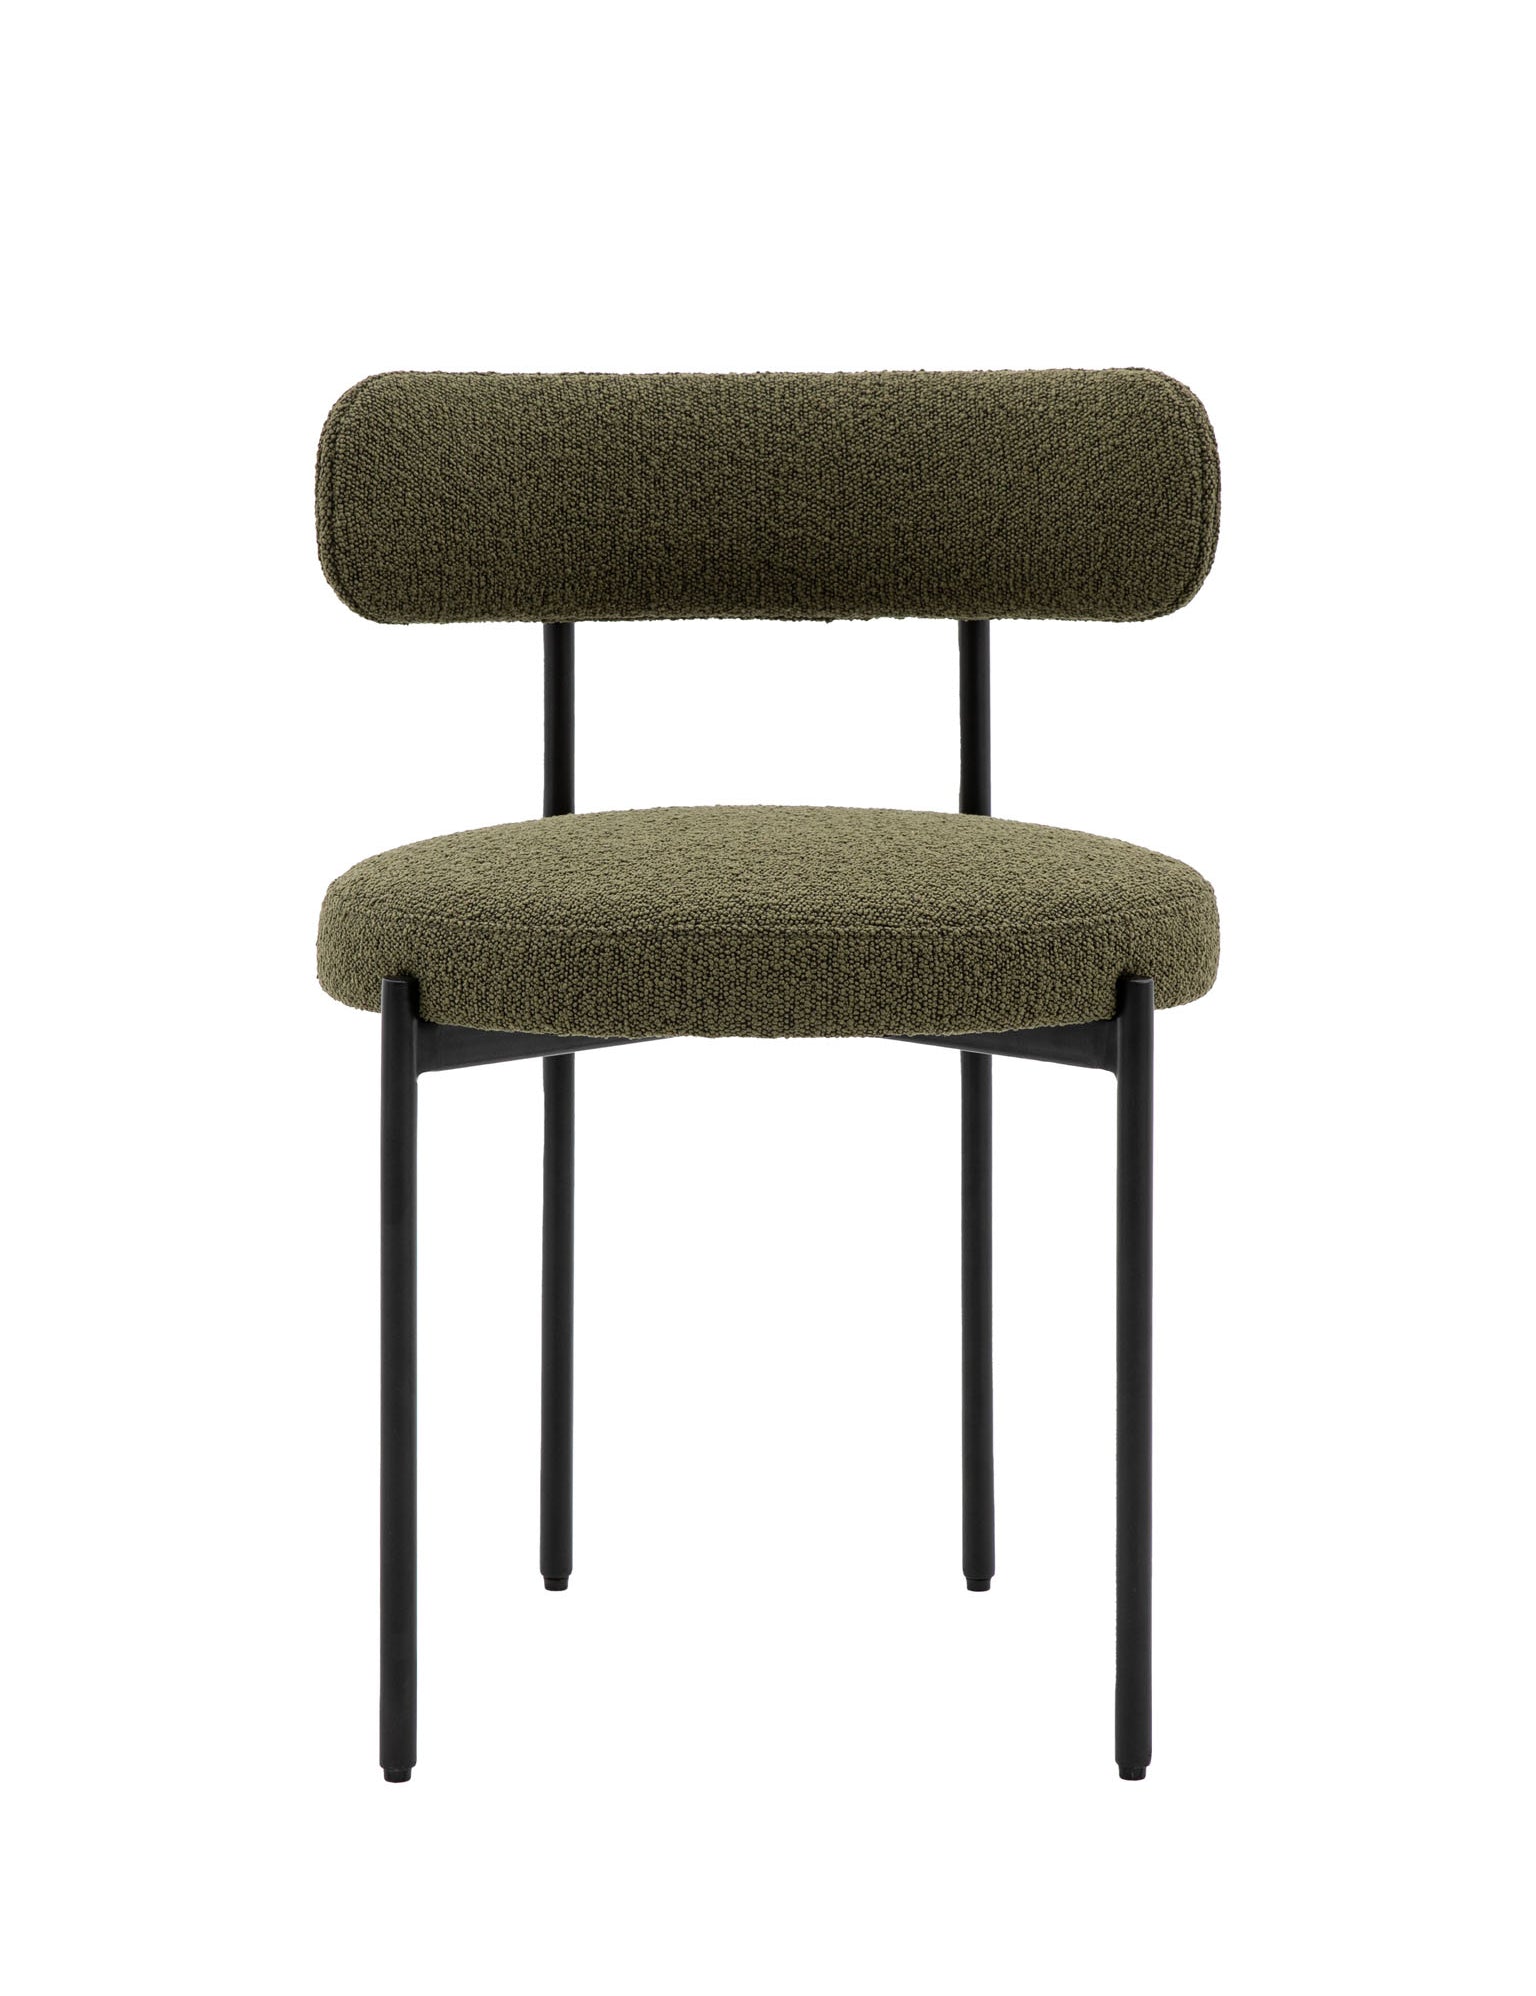 Green upholdetered dining chair with black metal legs